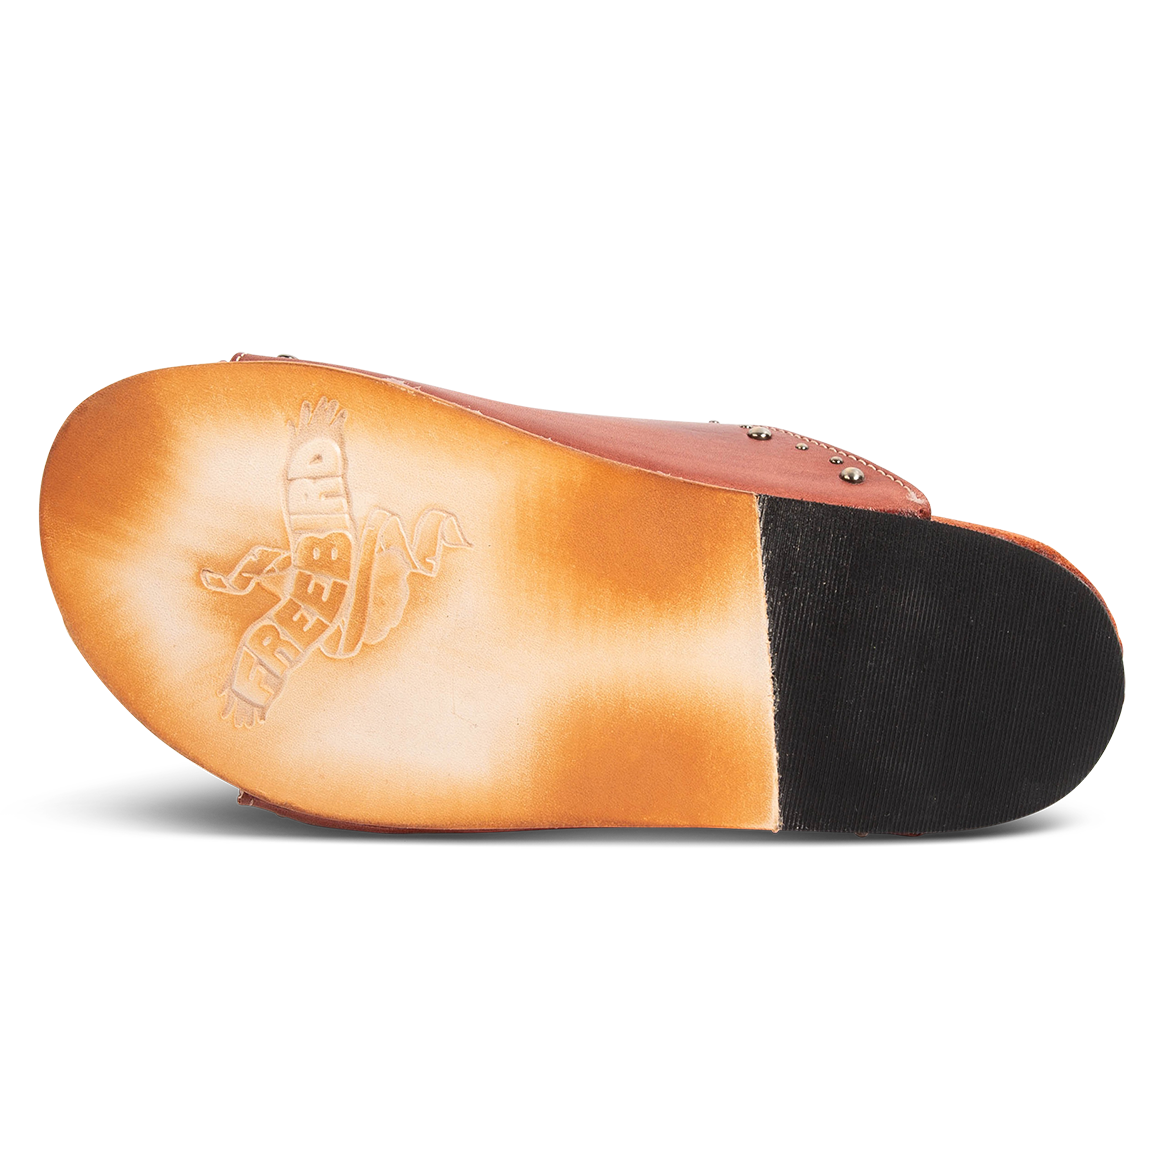 Leather sole with a tread heel imprinted with FREEBIRD on women's Asher rust sandal